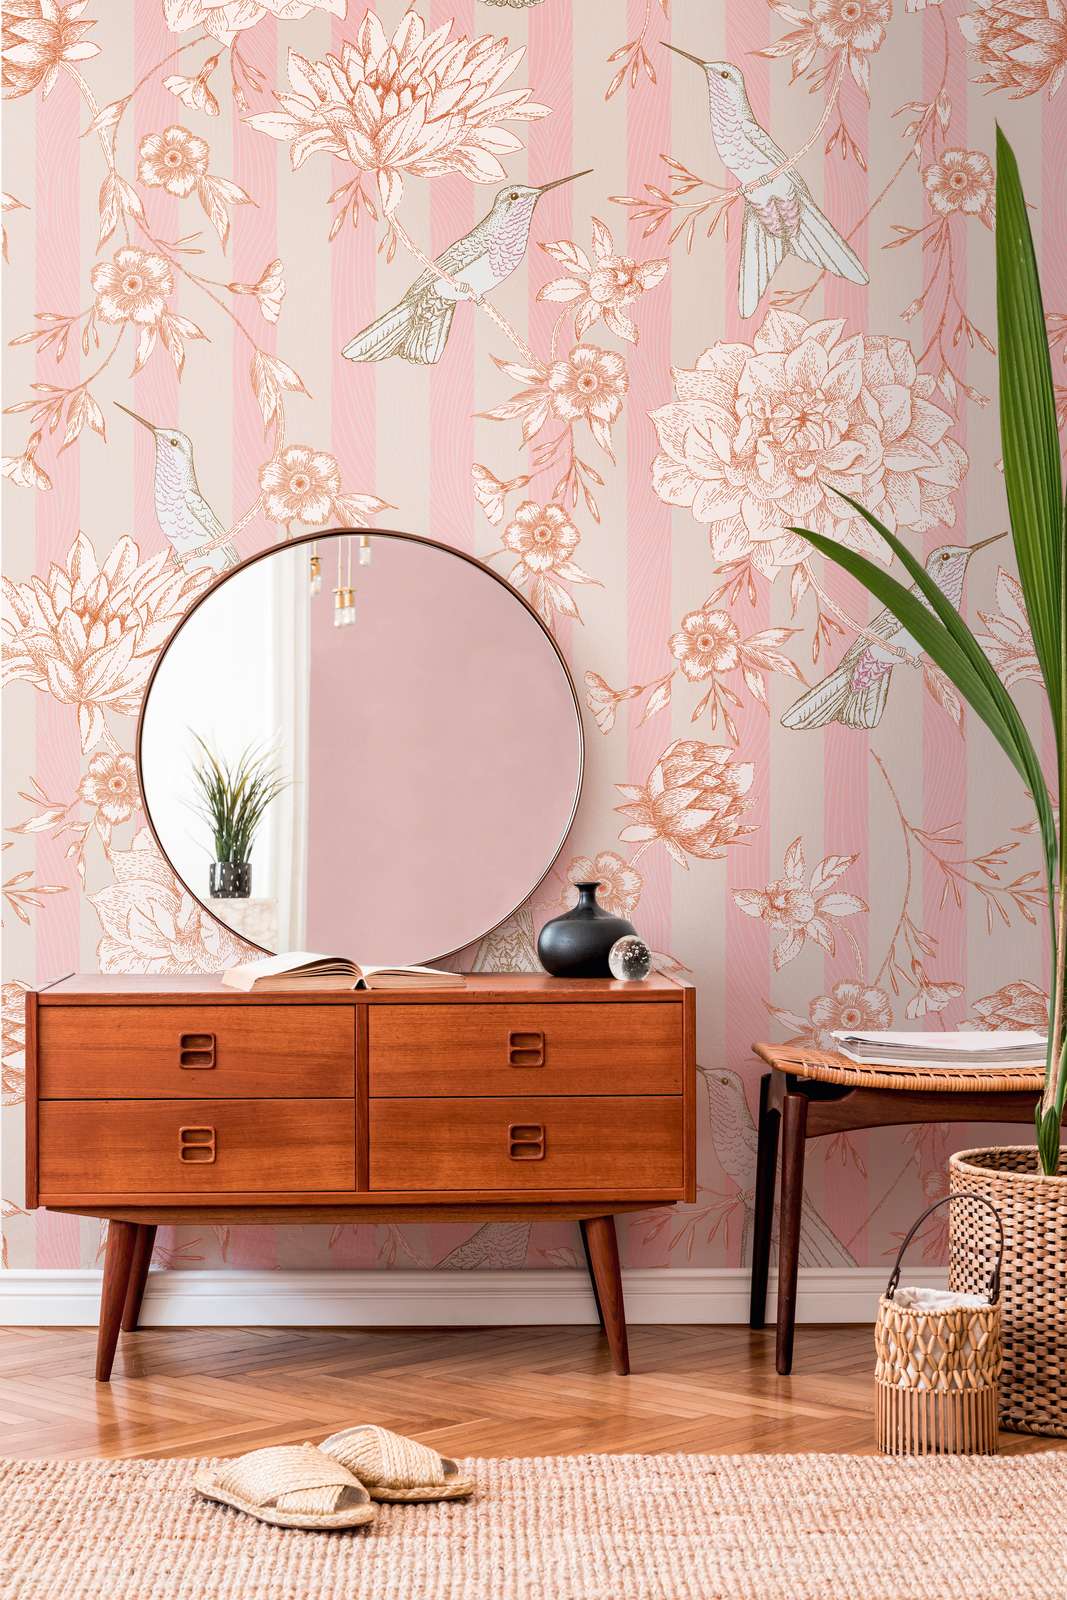             Striped wallpaper with floral motif and birds - pink, beige, orange
        